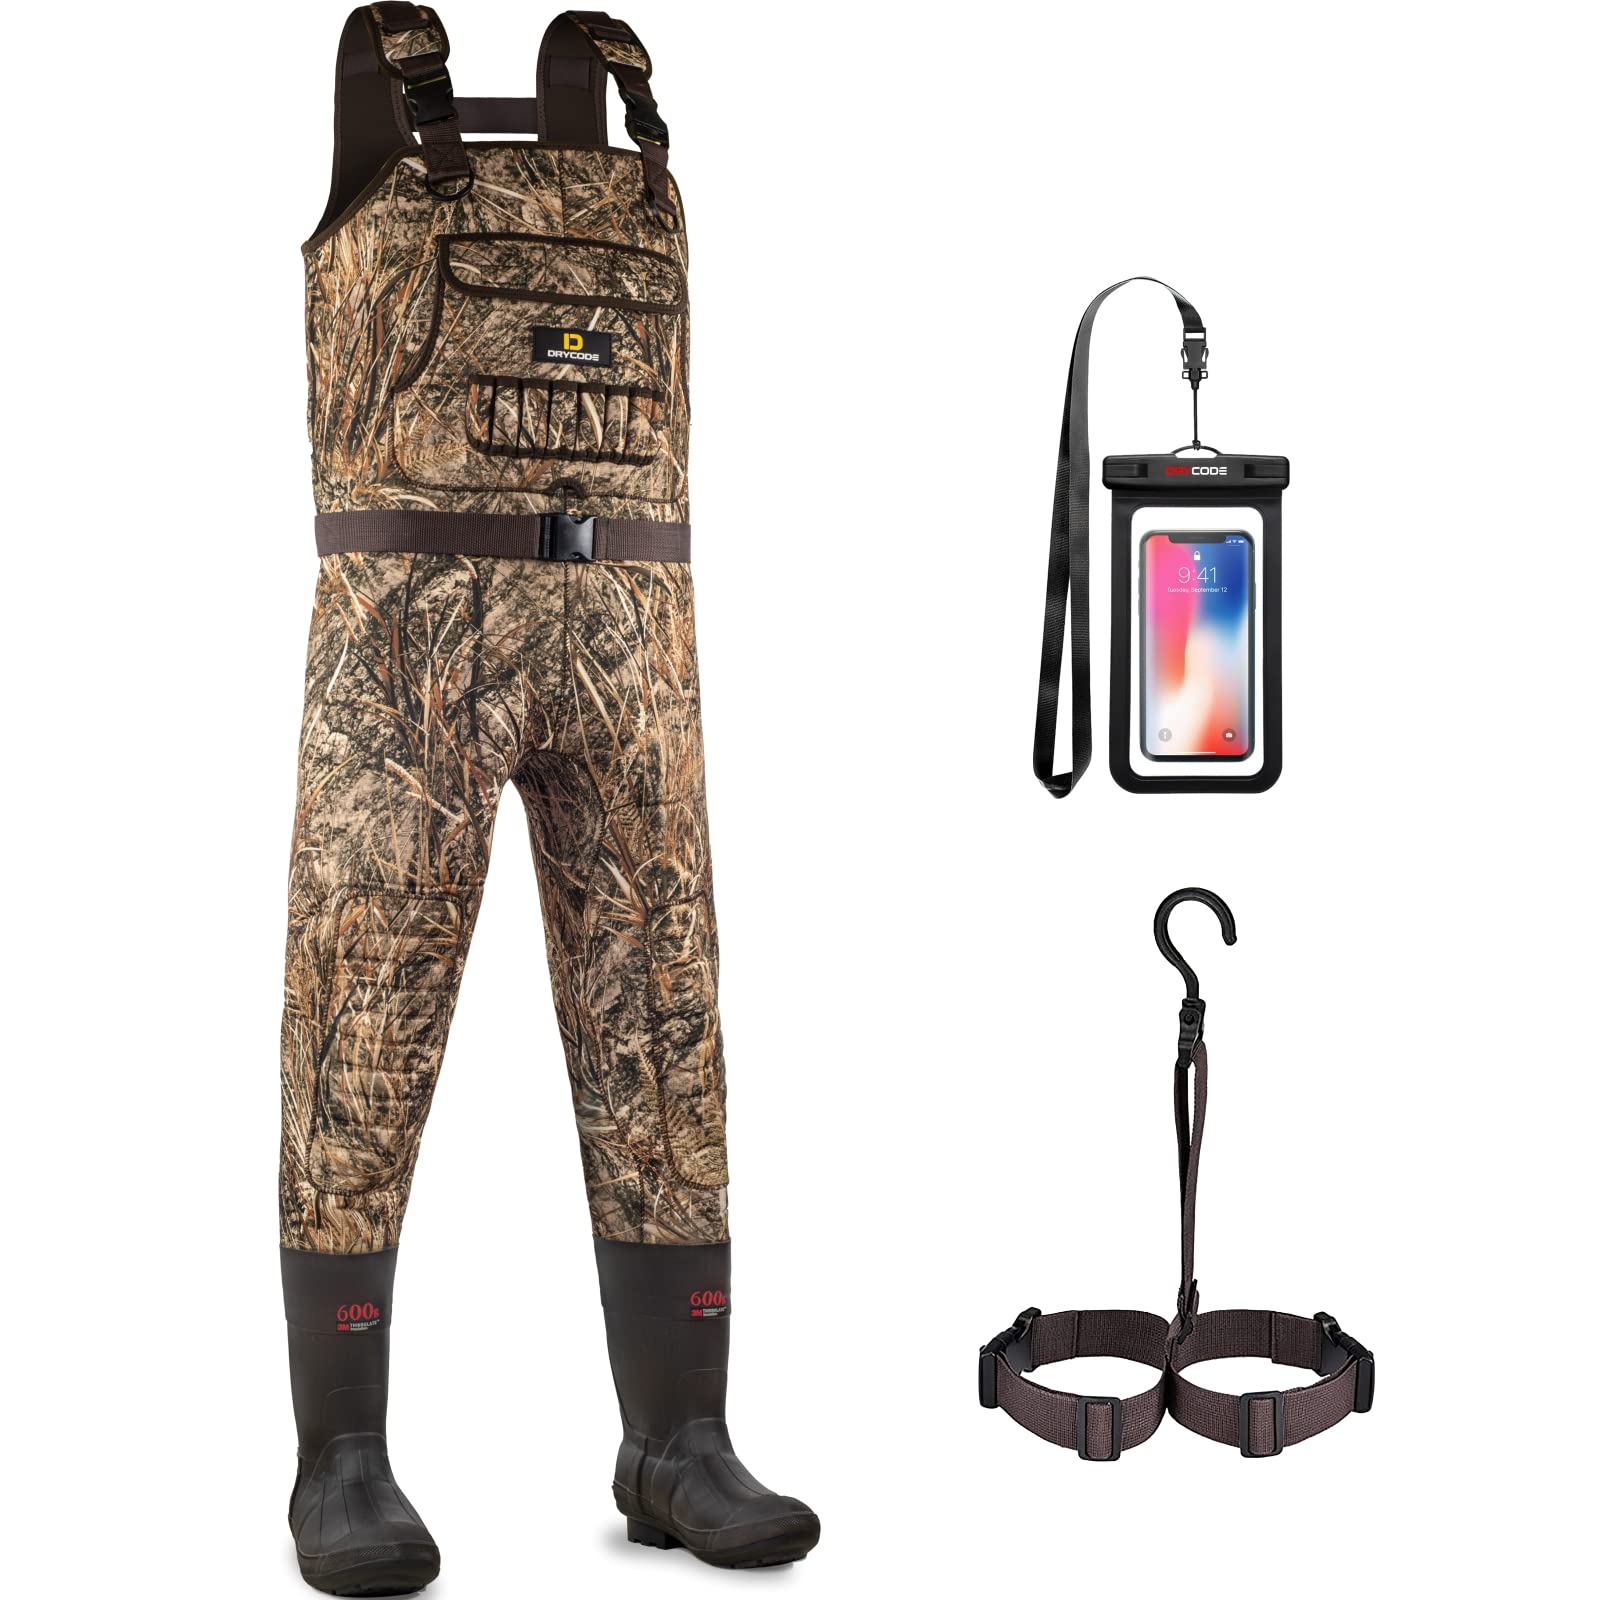 DRYCODE Chest Waders, Neoprene Waders for Men with 600G Boots, Waterproof  Insulated Camo Duck Hunting Waders